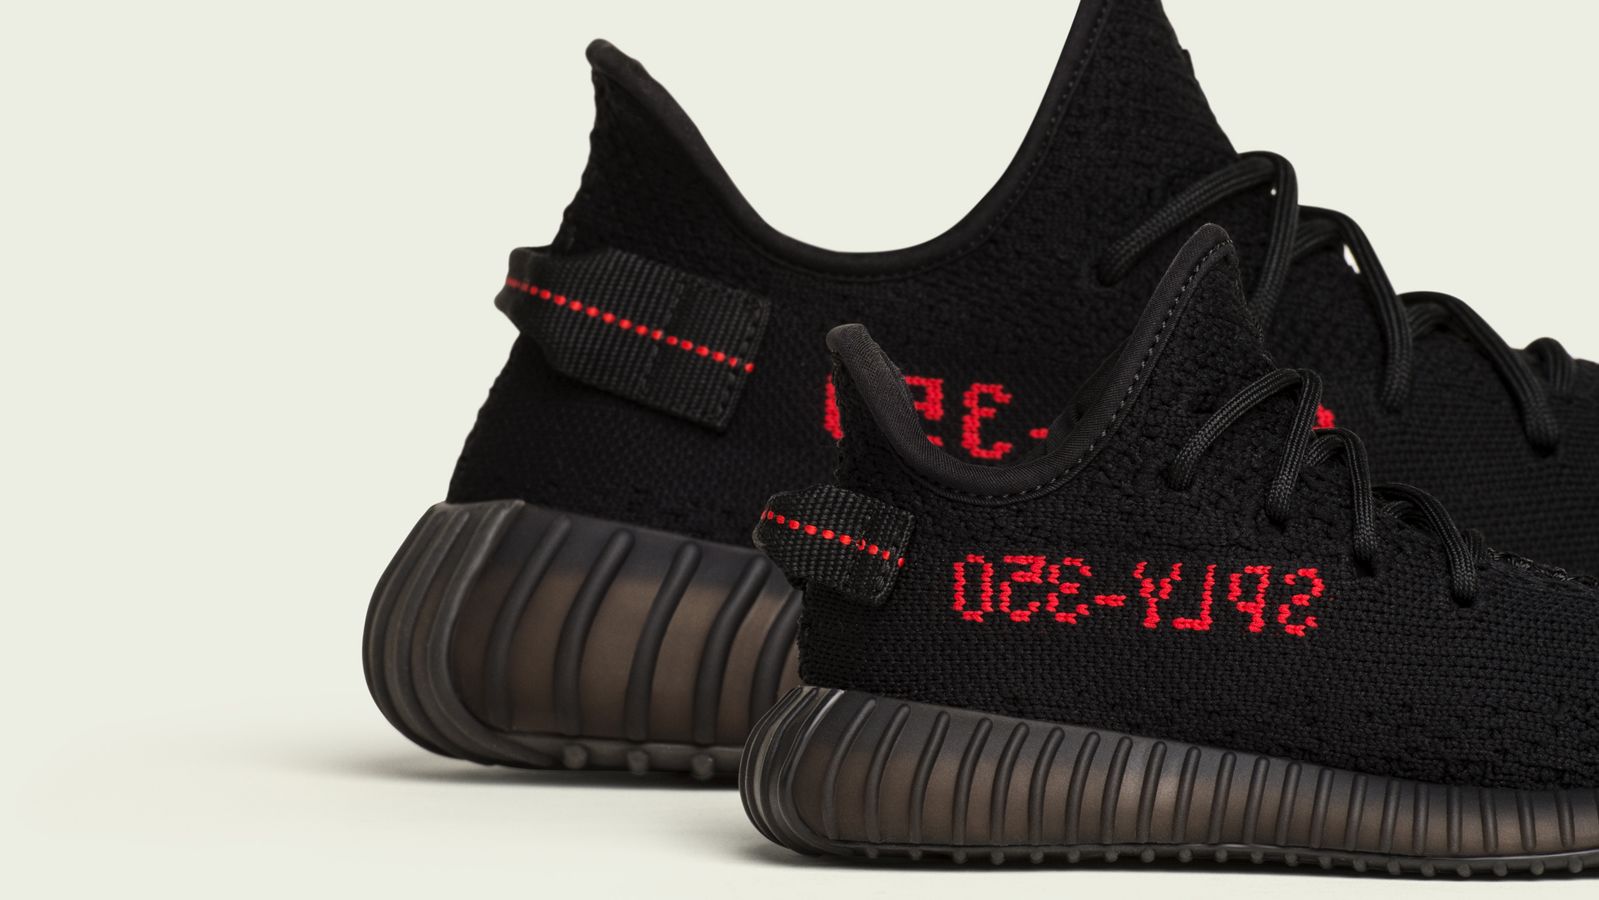 Maak leven Overeenkomend Editor Adidas Yeezy Boost 350 V2: Shoppers line up for new Kanye West sneaker | CNN